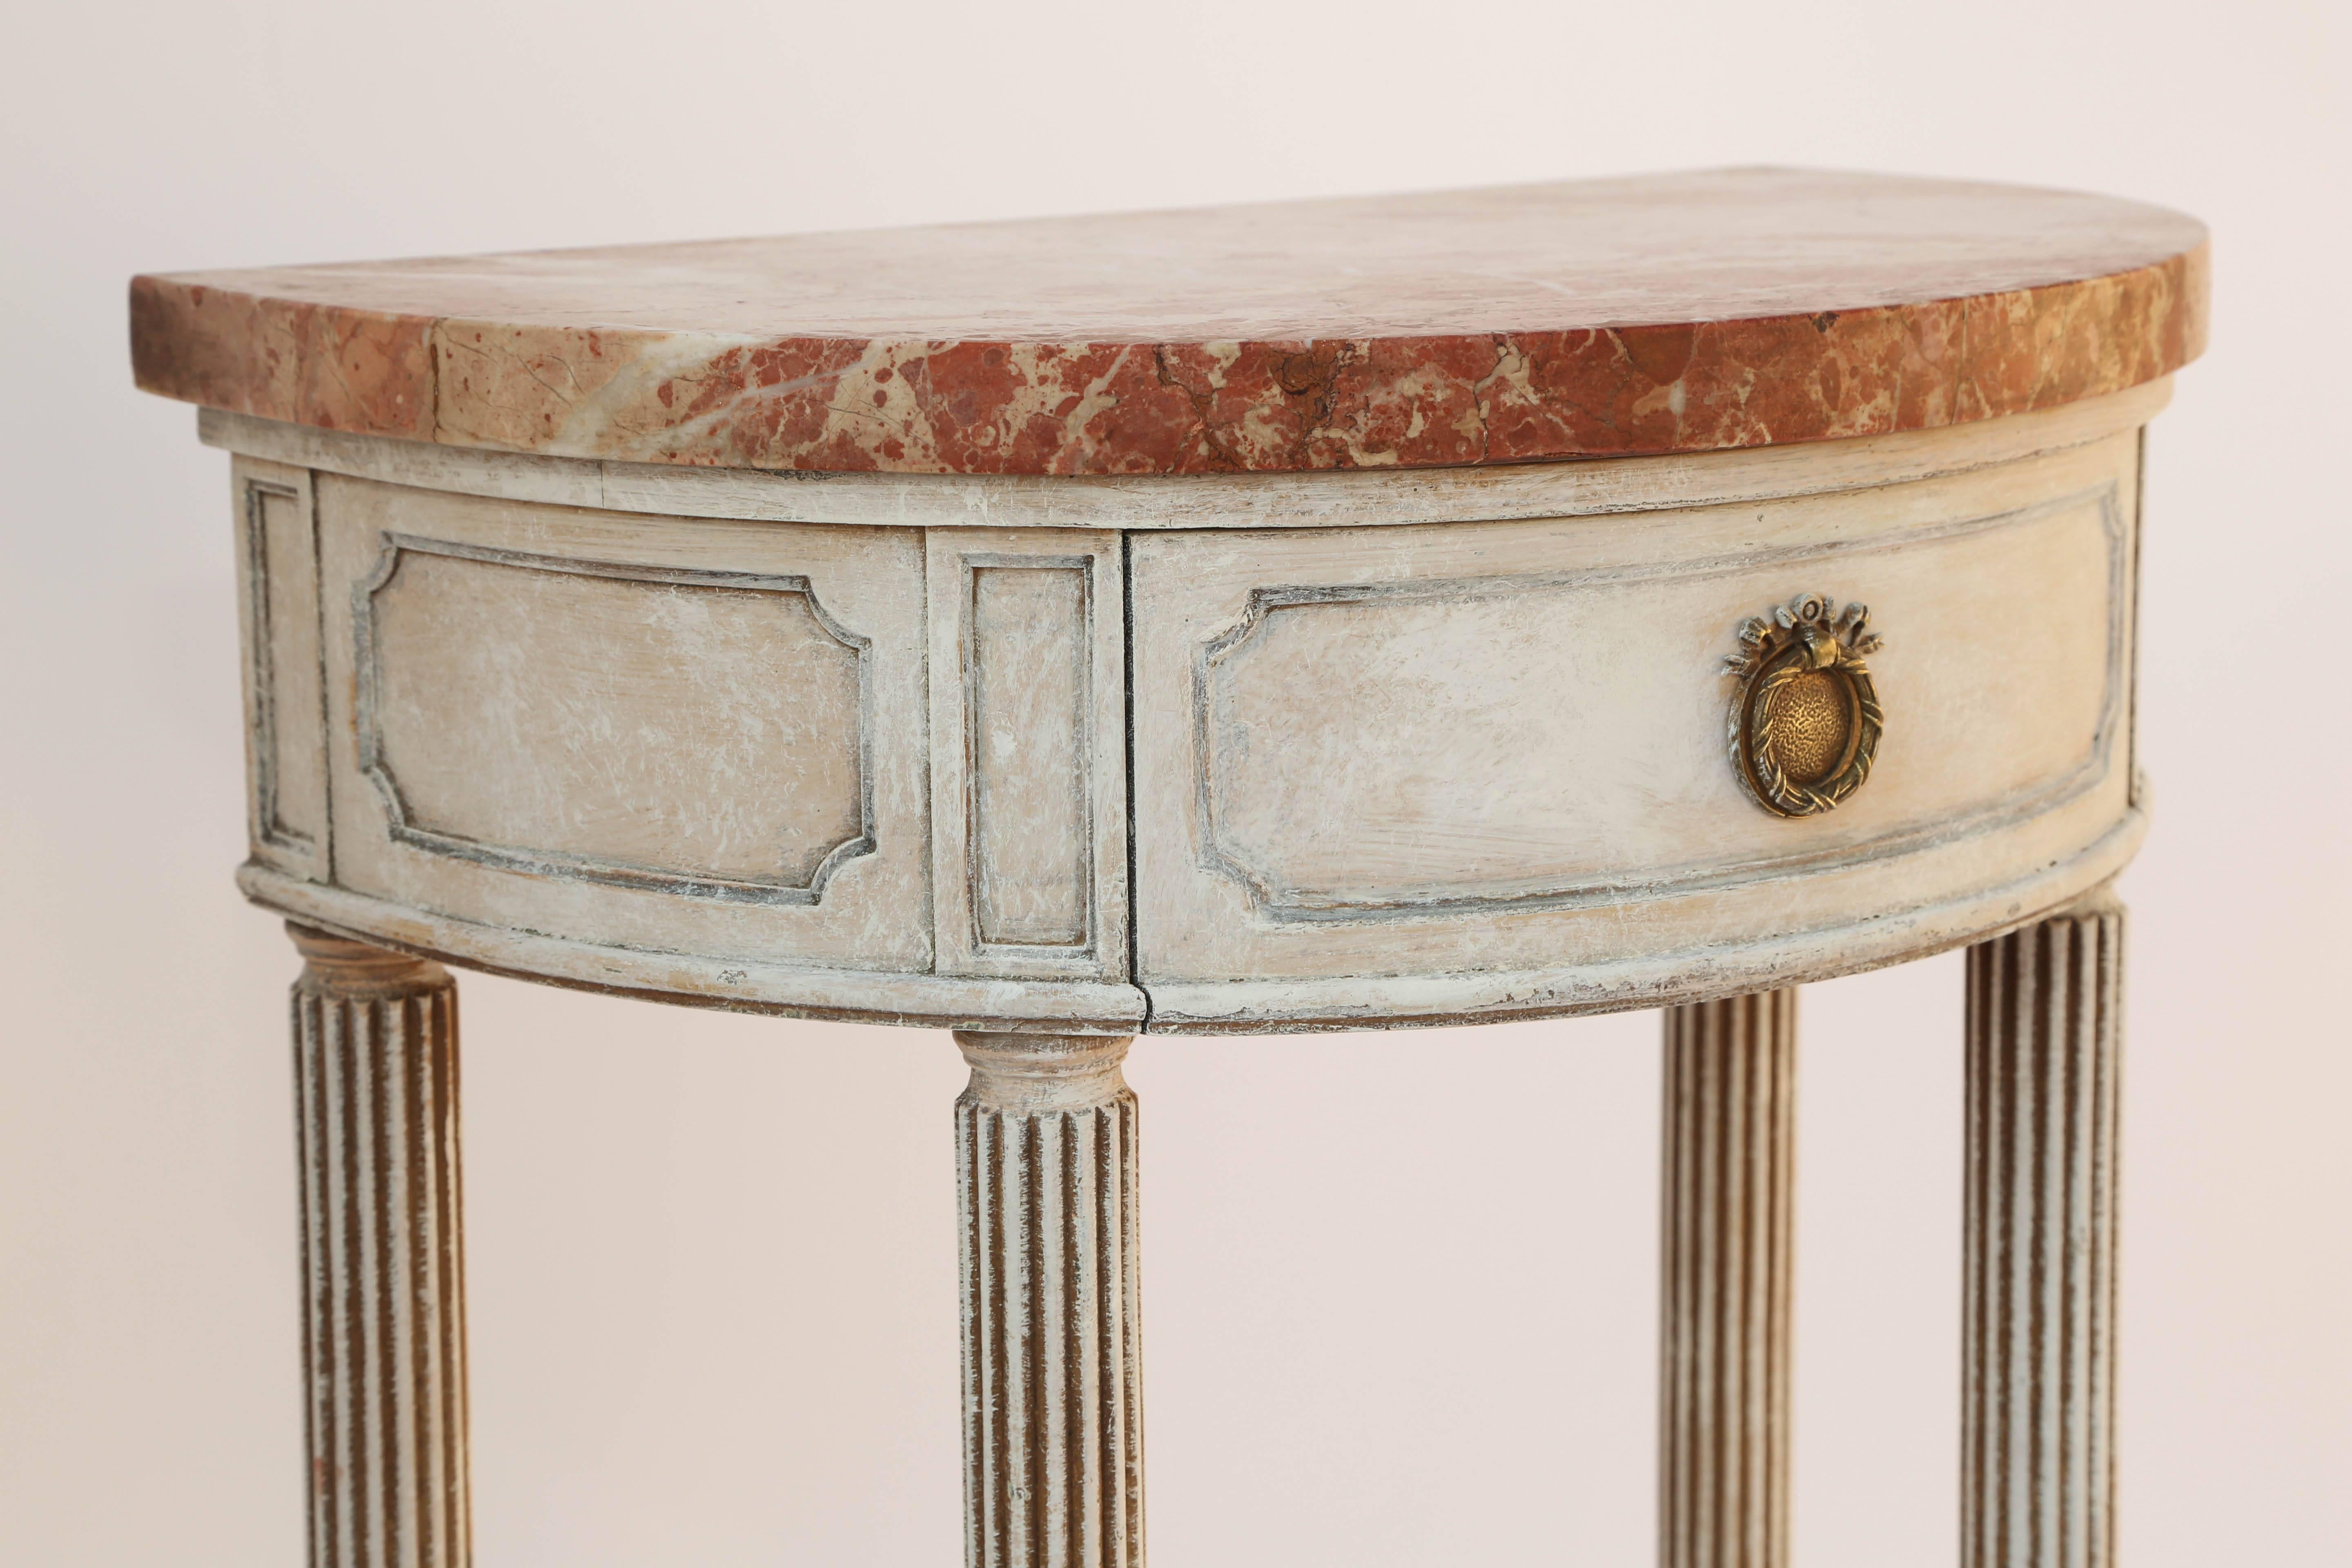 20th Century Petite Demilune Console with Marble Top, circa 1920s